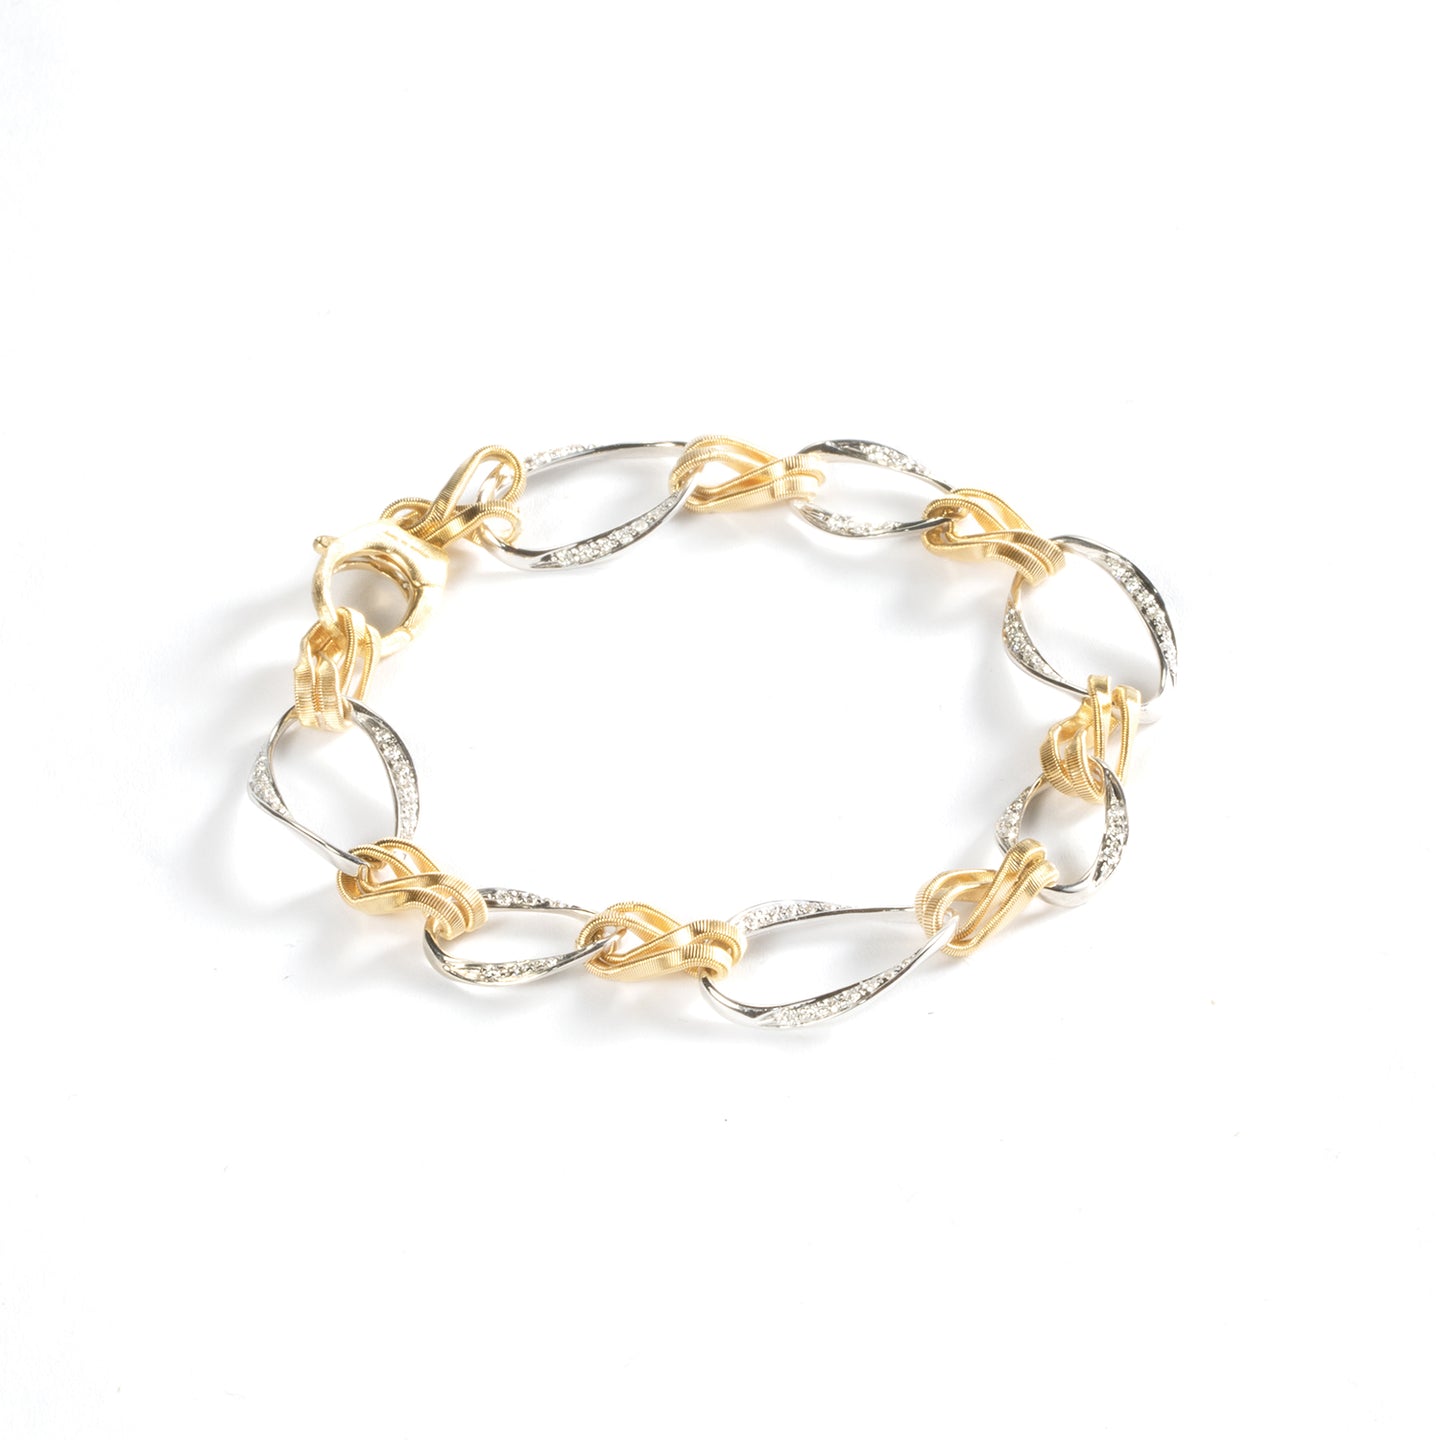 Marco Bicego Marrakech Onde 18K Yellow and White Gold Twist Link Bracelet with Diamond Accents